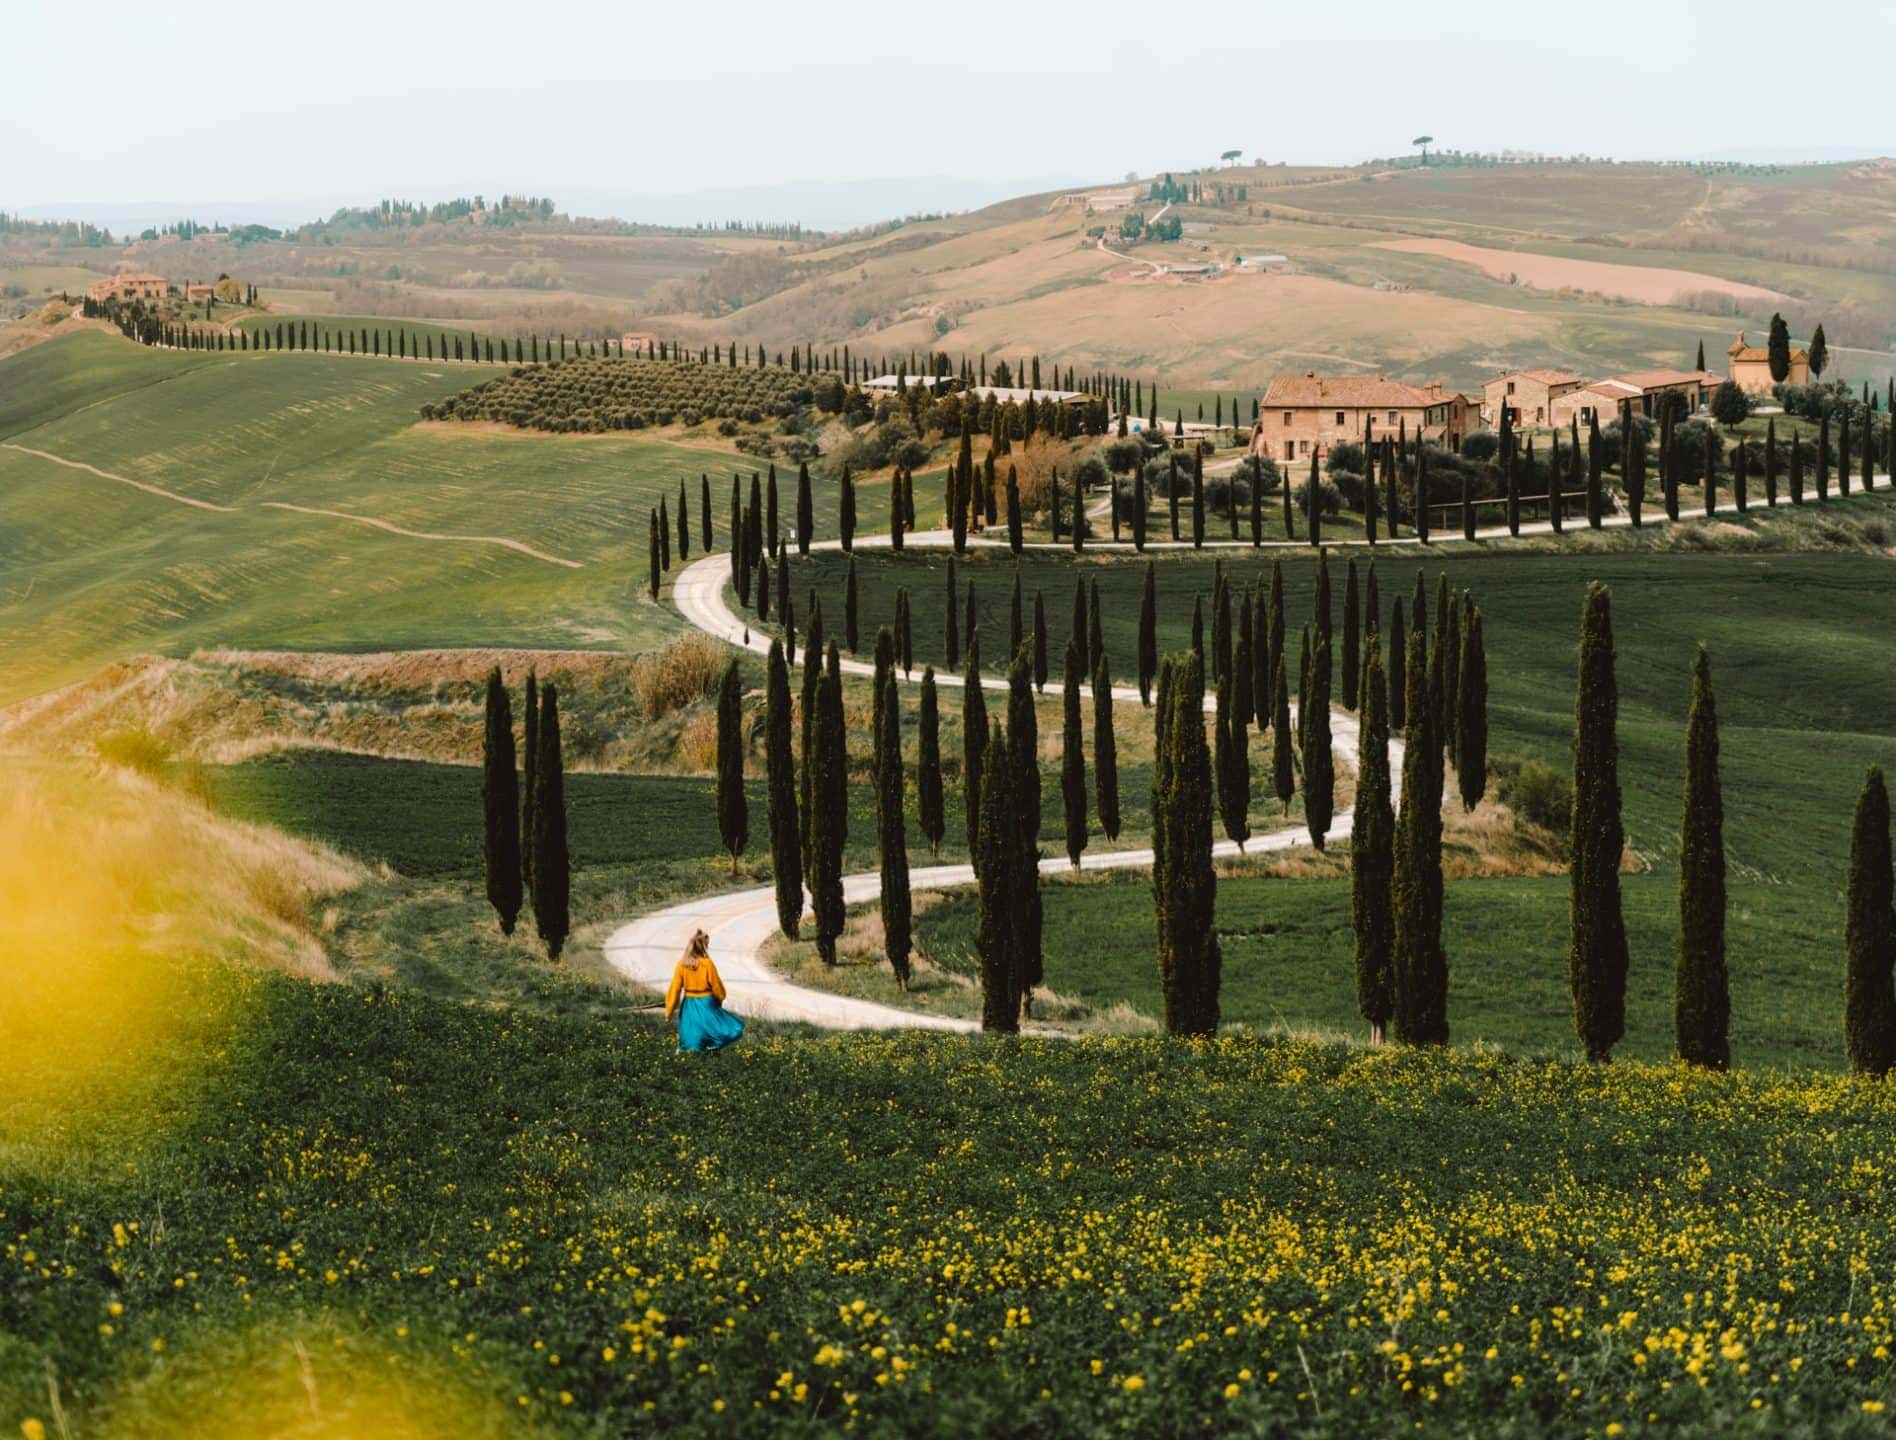 TUSCANY ROAD TRIP: Best Things To Do in Tuscany in 3 Days